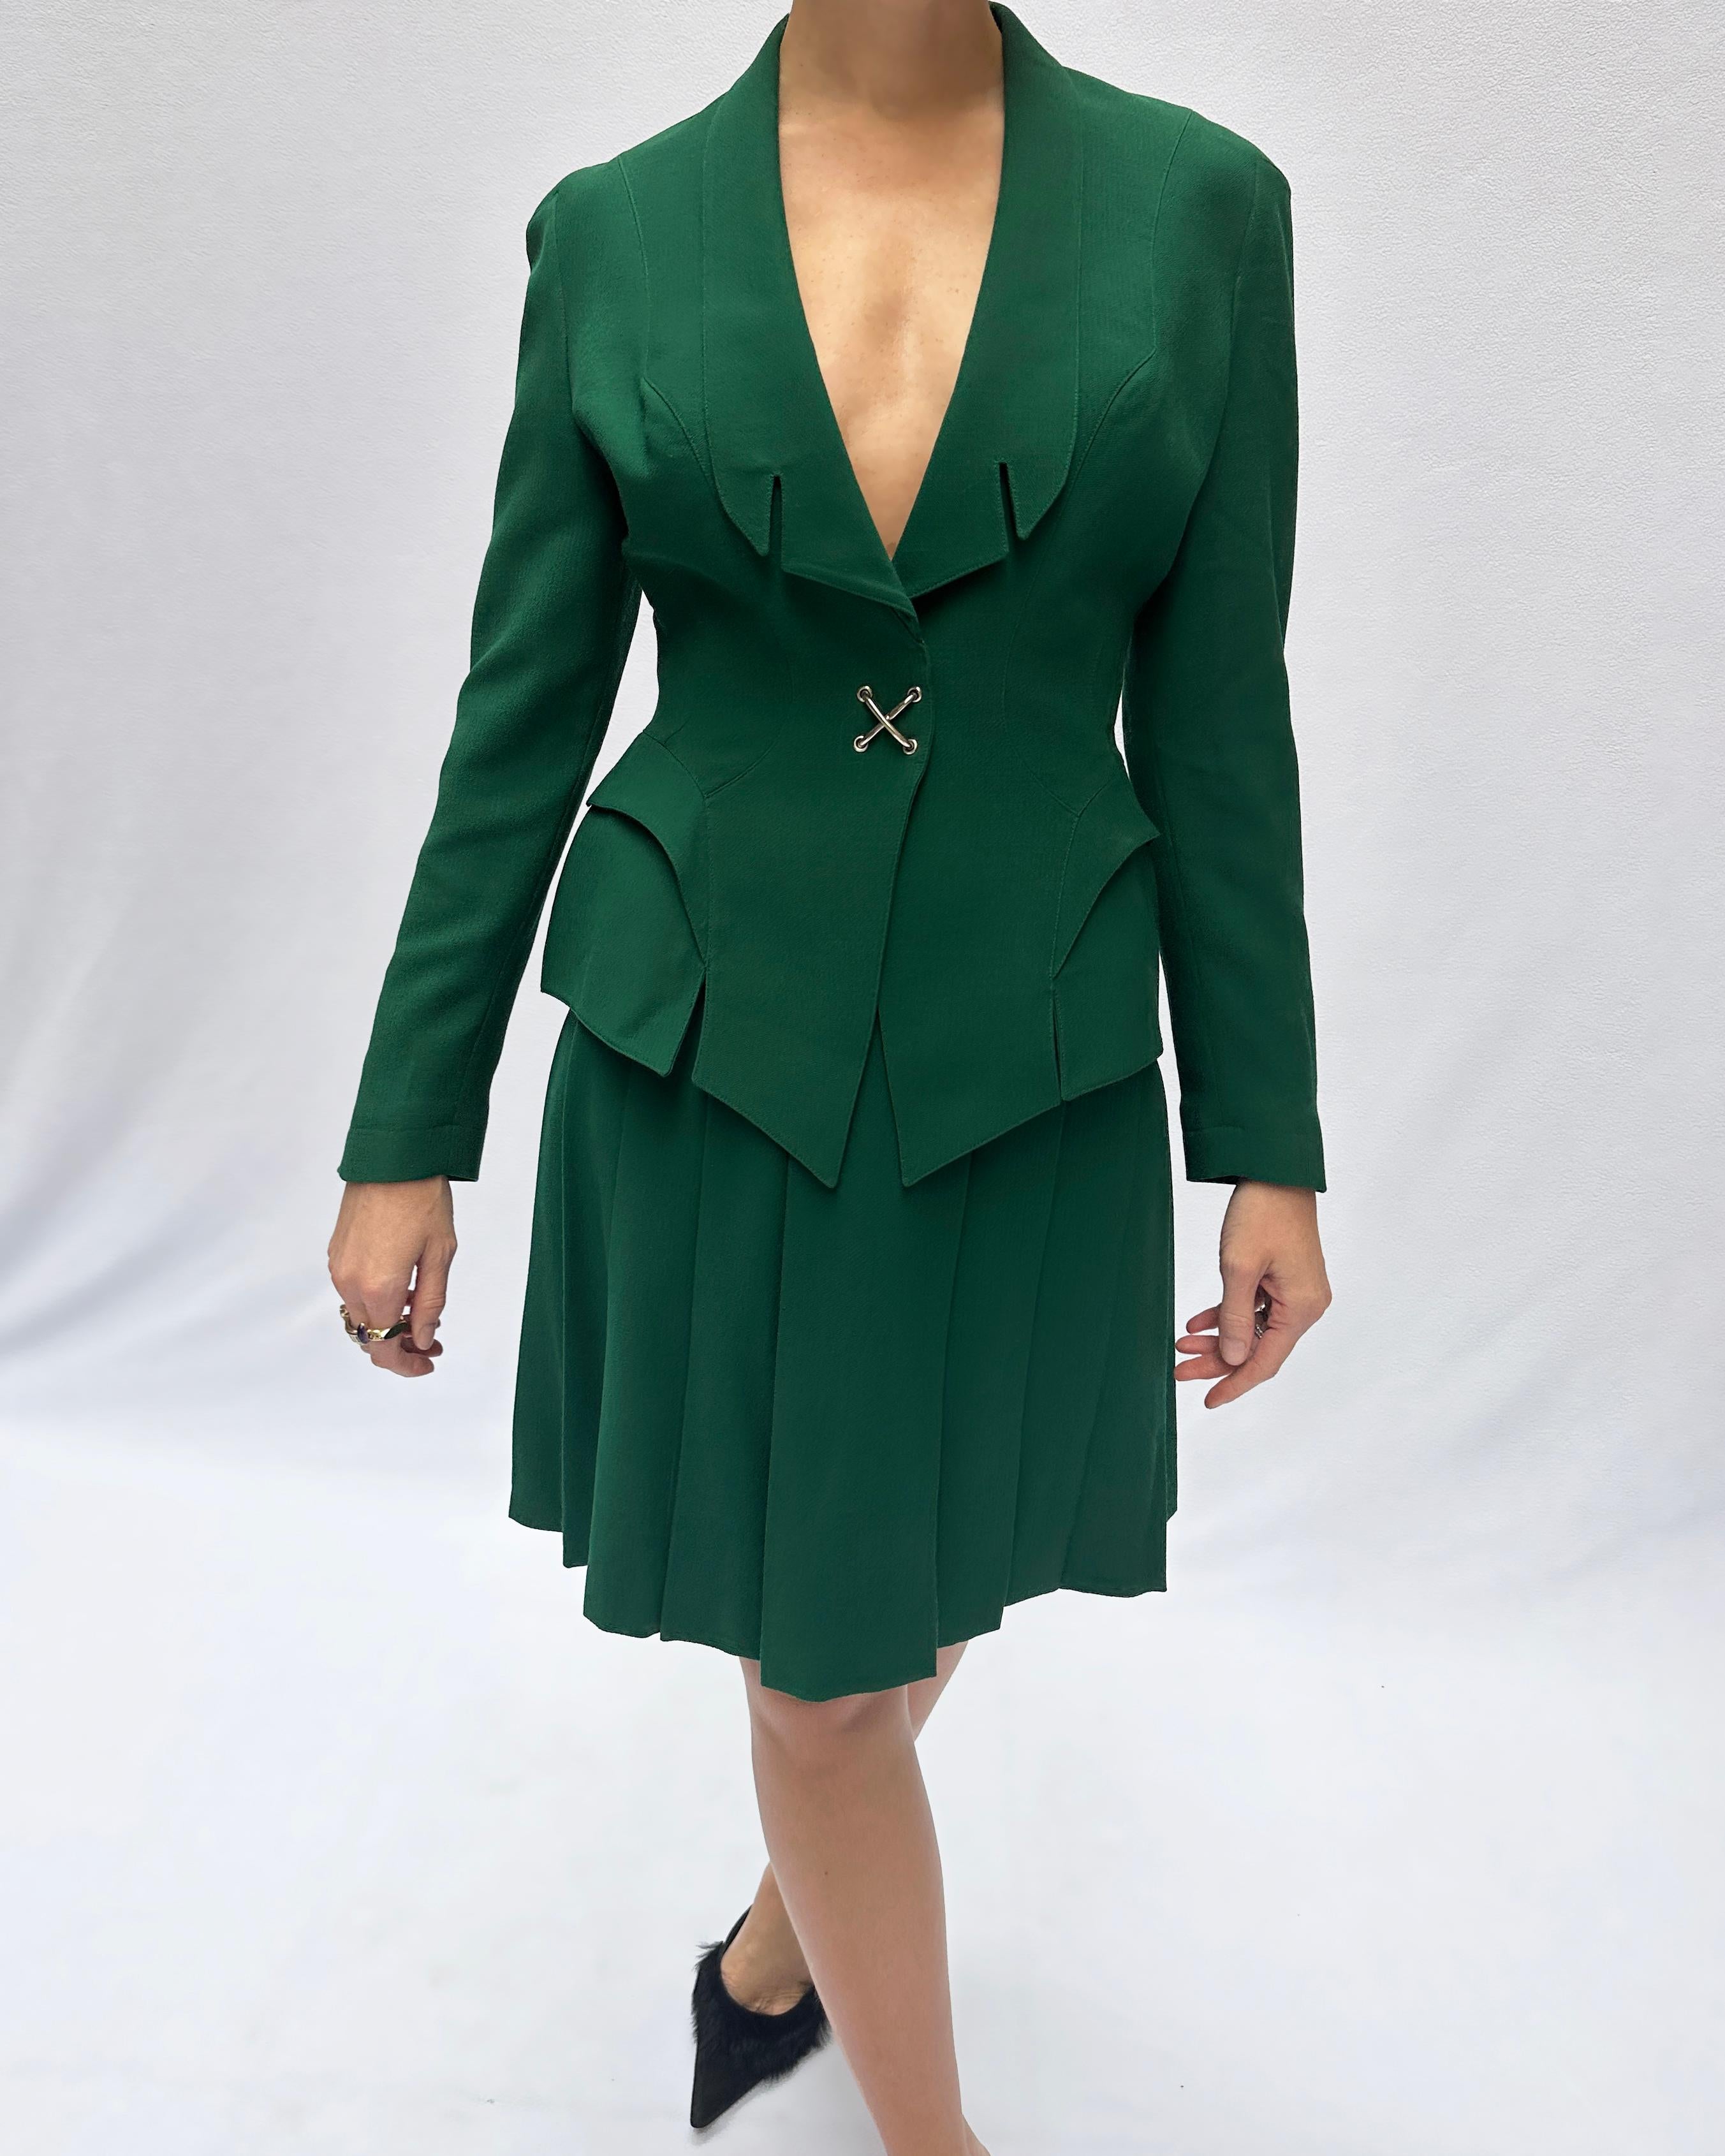 Women's Vintage Thierry Mugler Fall 1992 Emerald Jacket + Pleated Skirt Suit For Sale